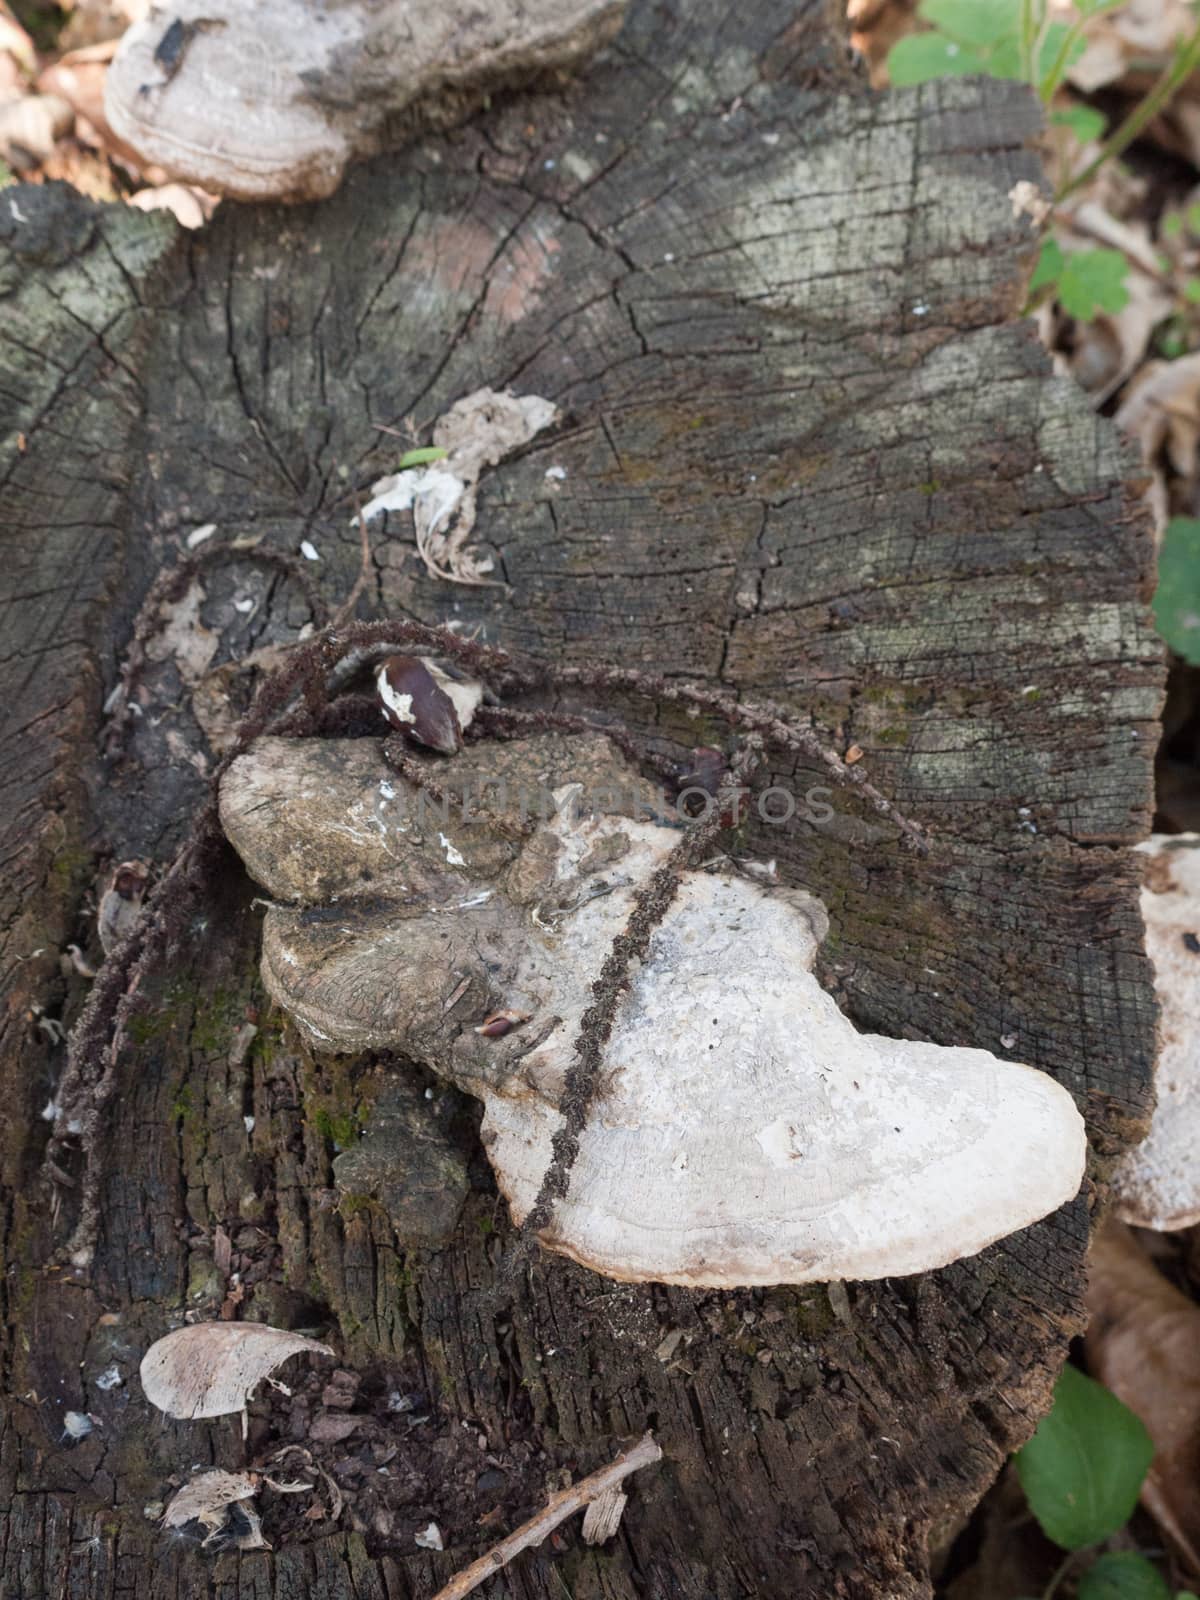 White Fungus Growing and Attached to a Chopped and Cut Down Wood Stump with Texture and Cracks in a Forest in Spring